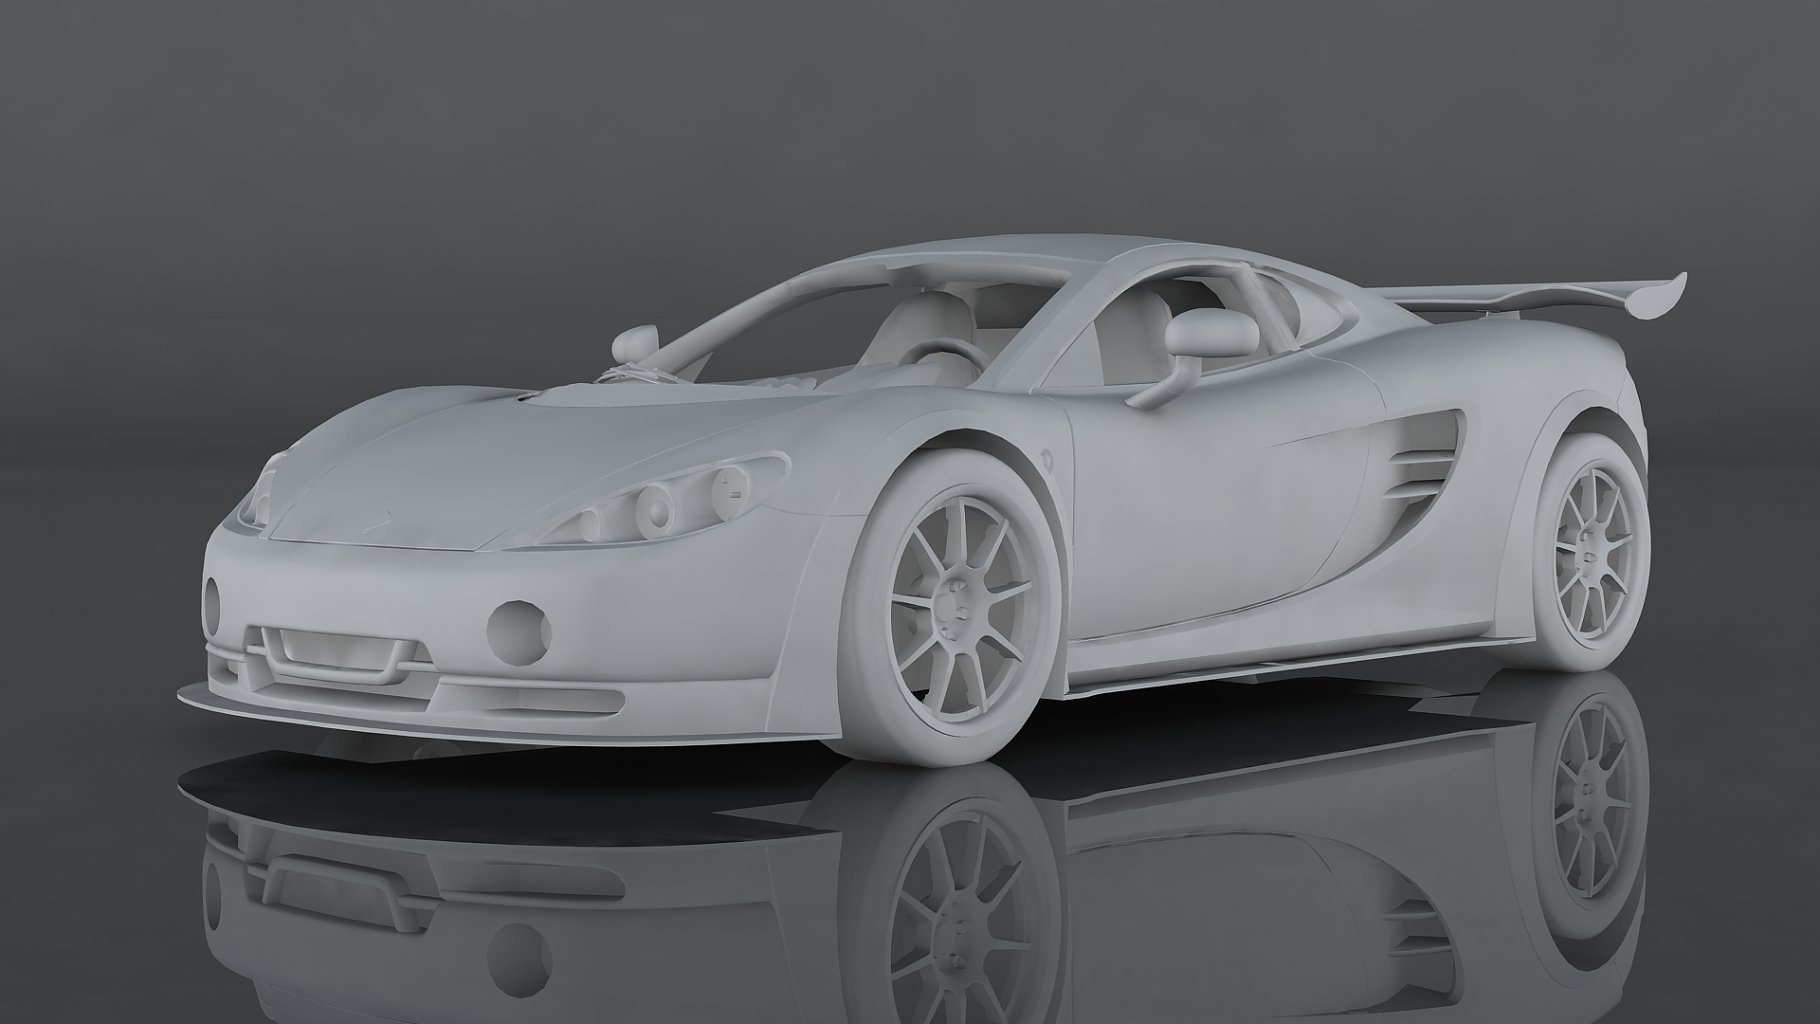 Graphic front left mockup of ascari kz1r low poly 3d model.